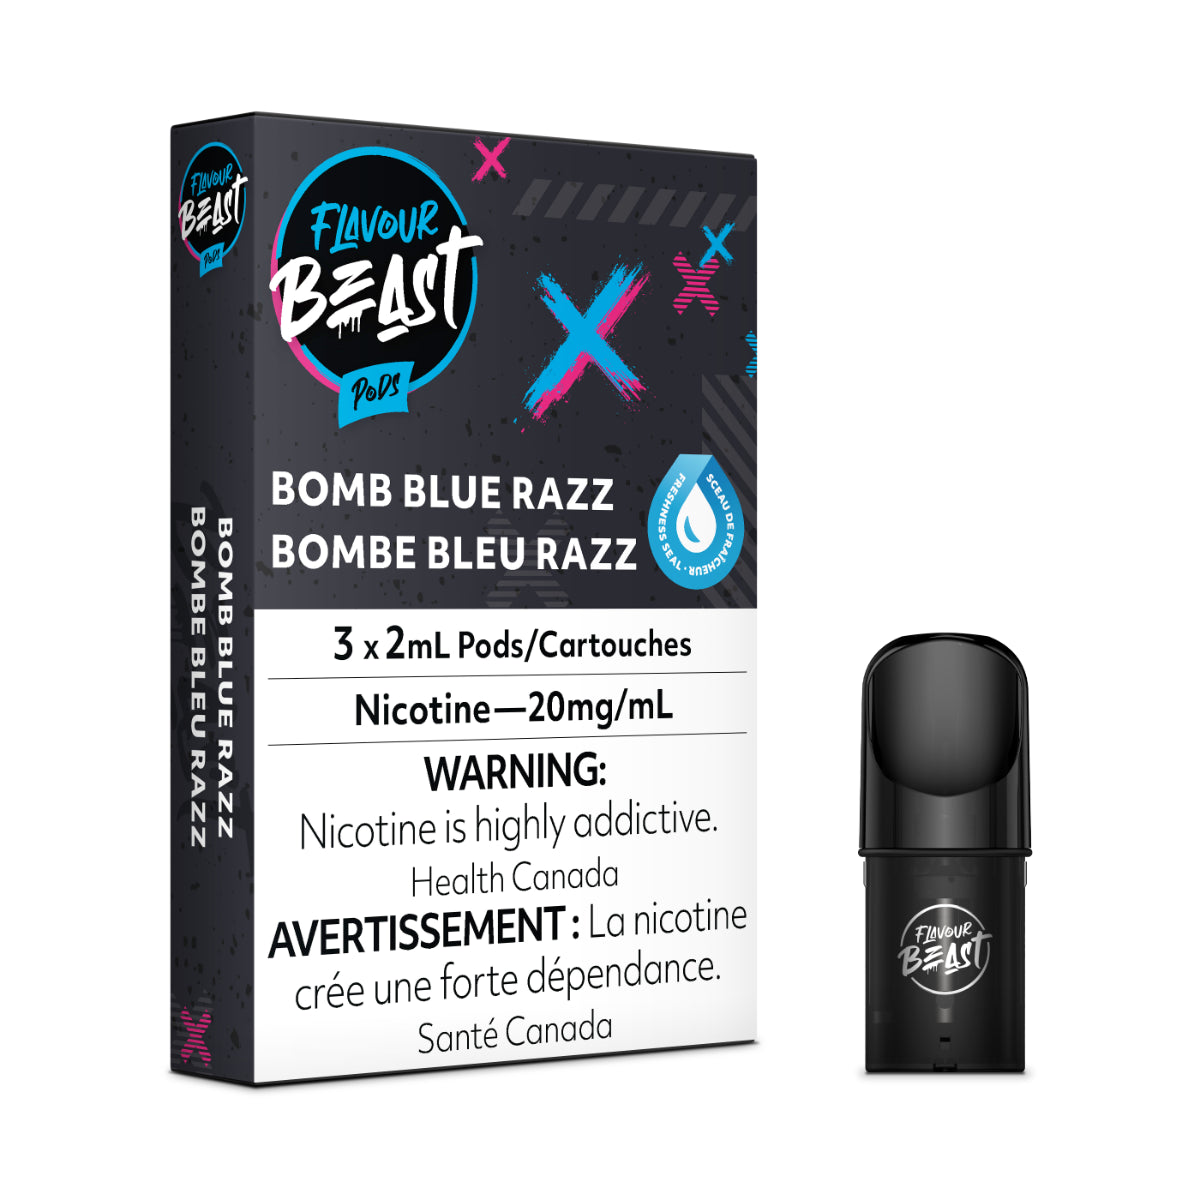 Bomb Blue Razz - Flavour Beast Pod Pack - 20mg - EXCISED